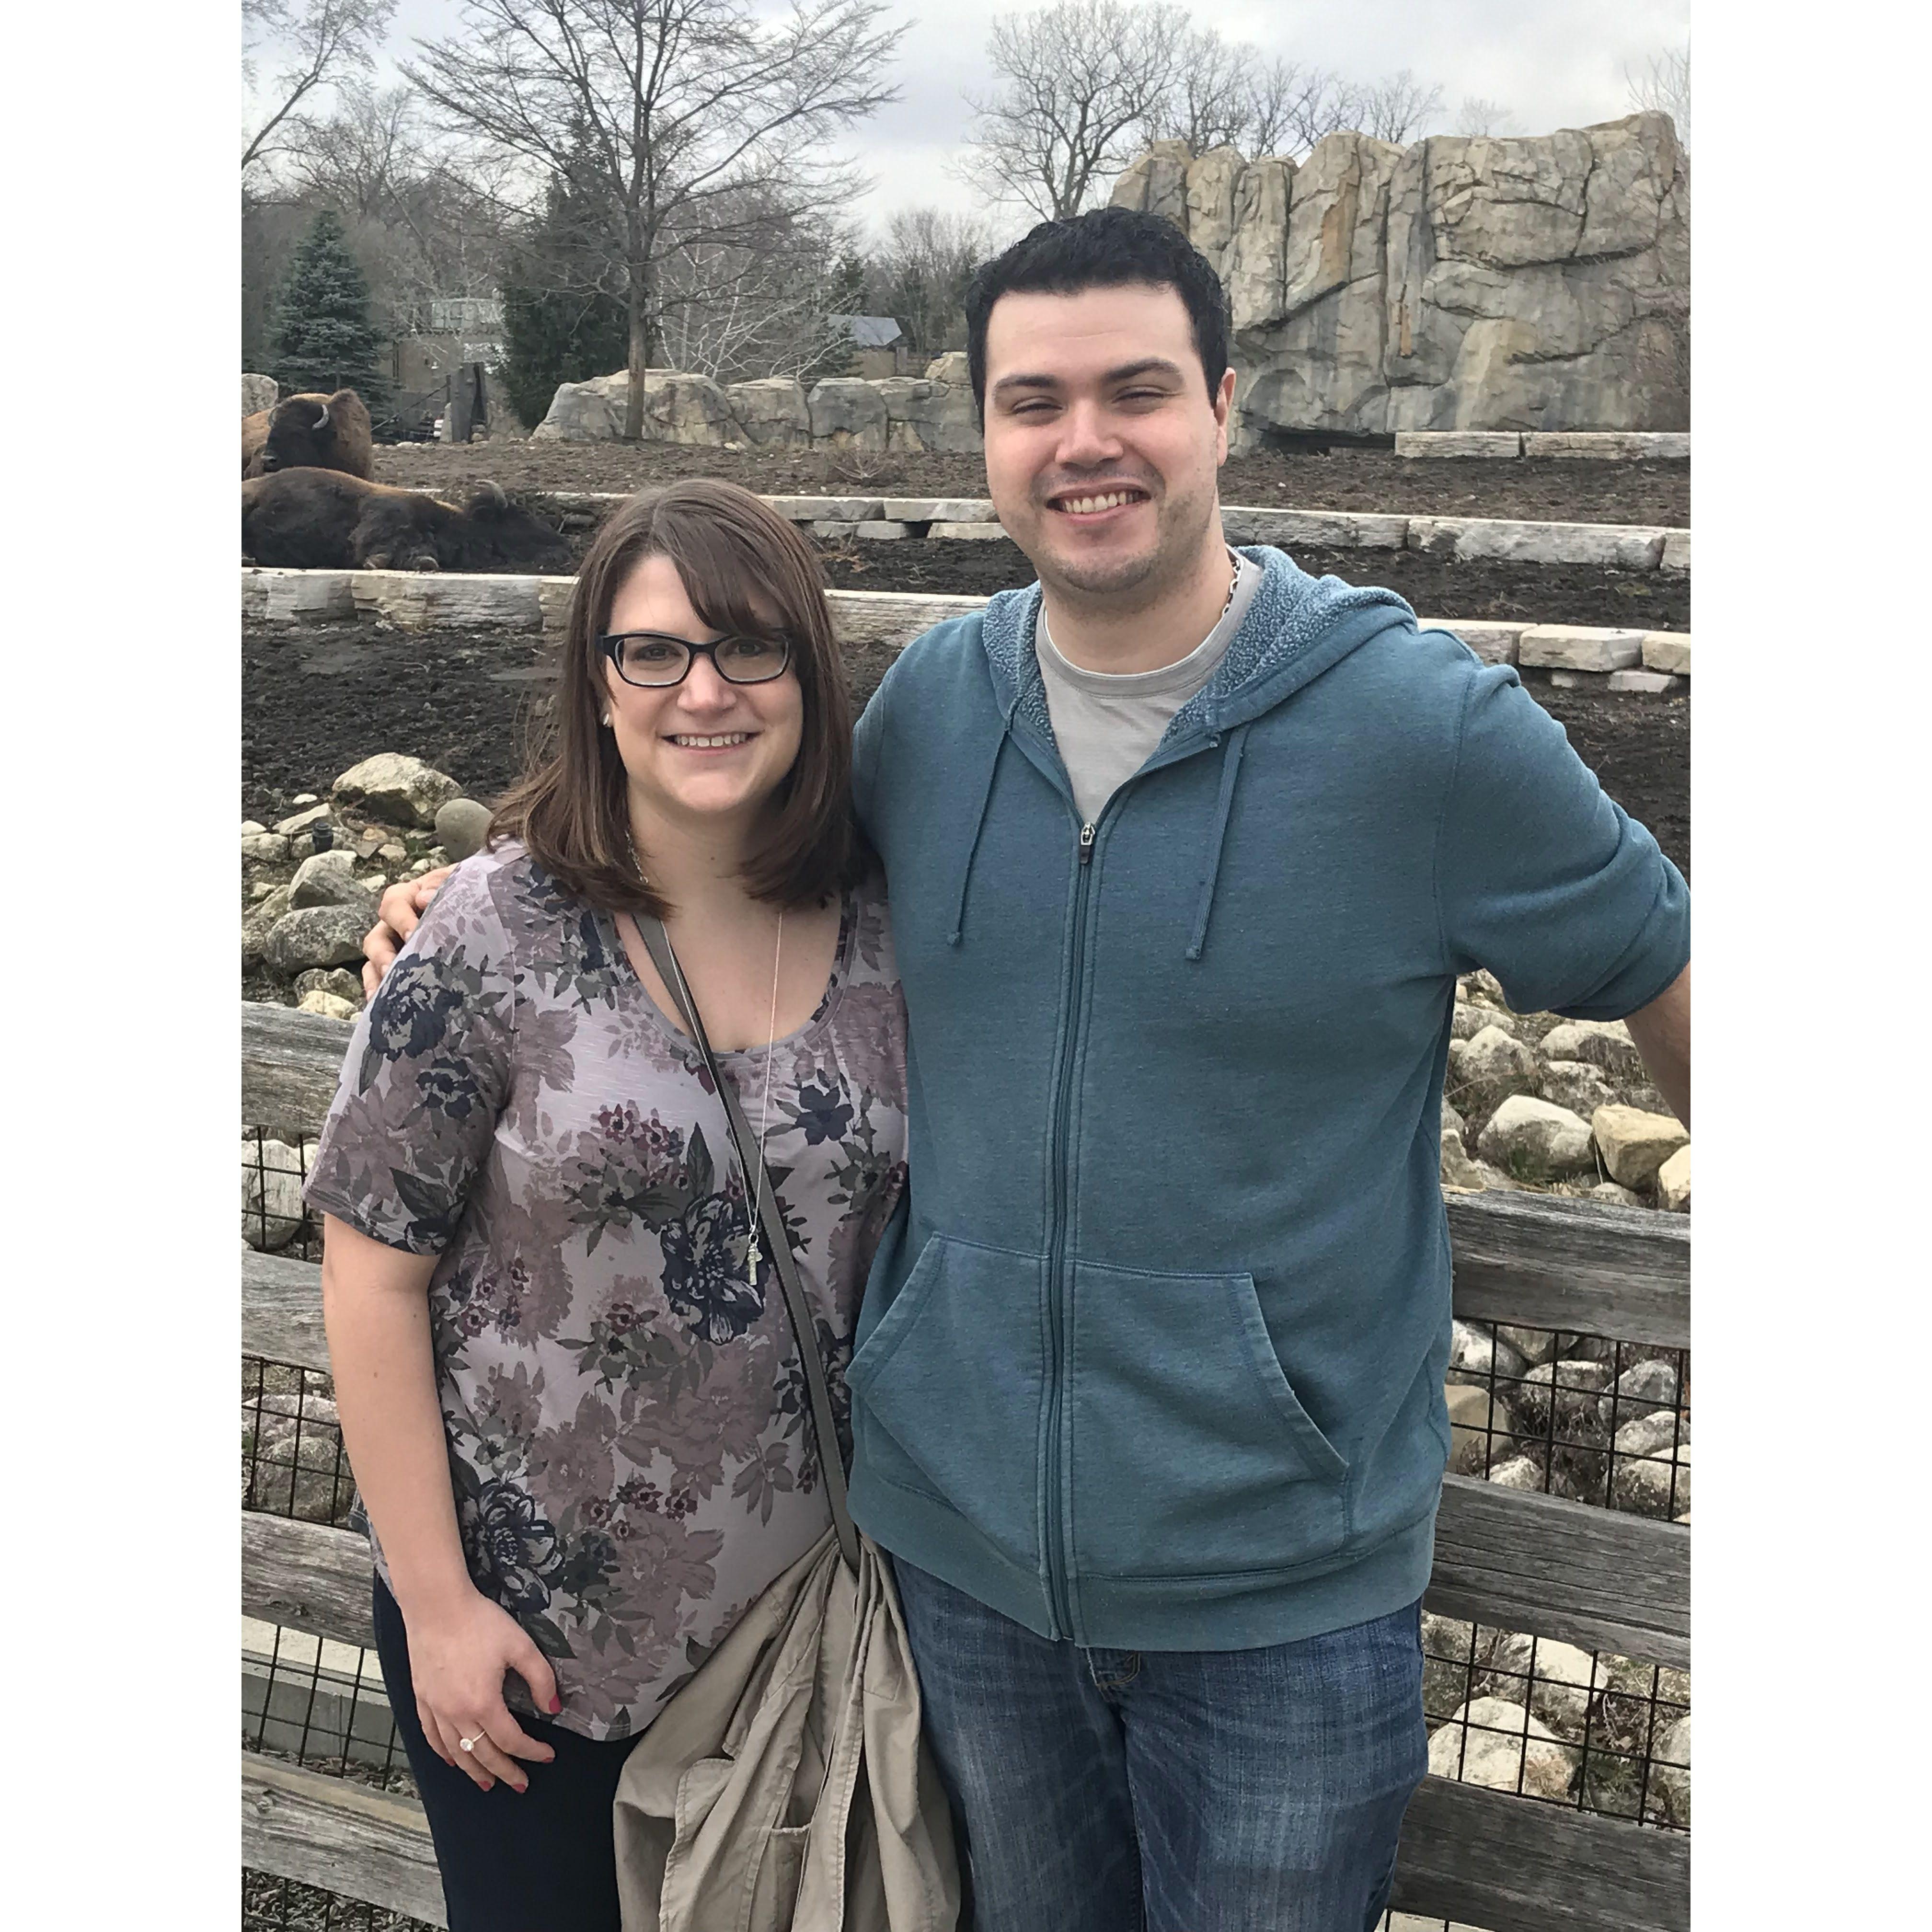 First date April 2019!